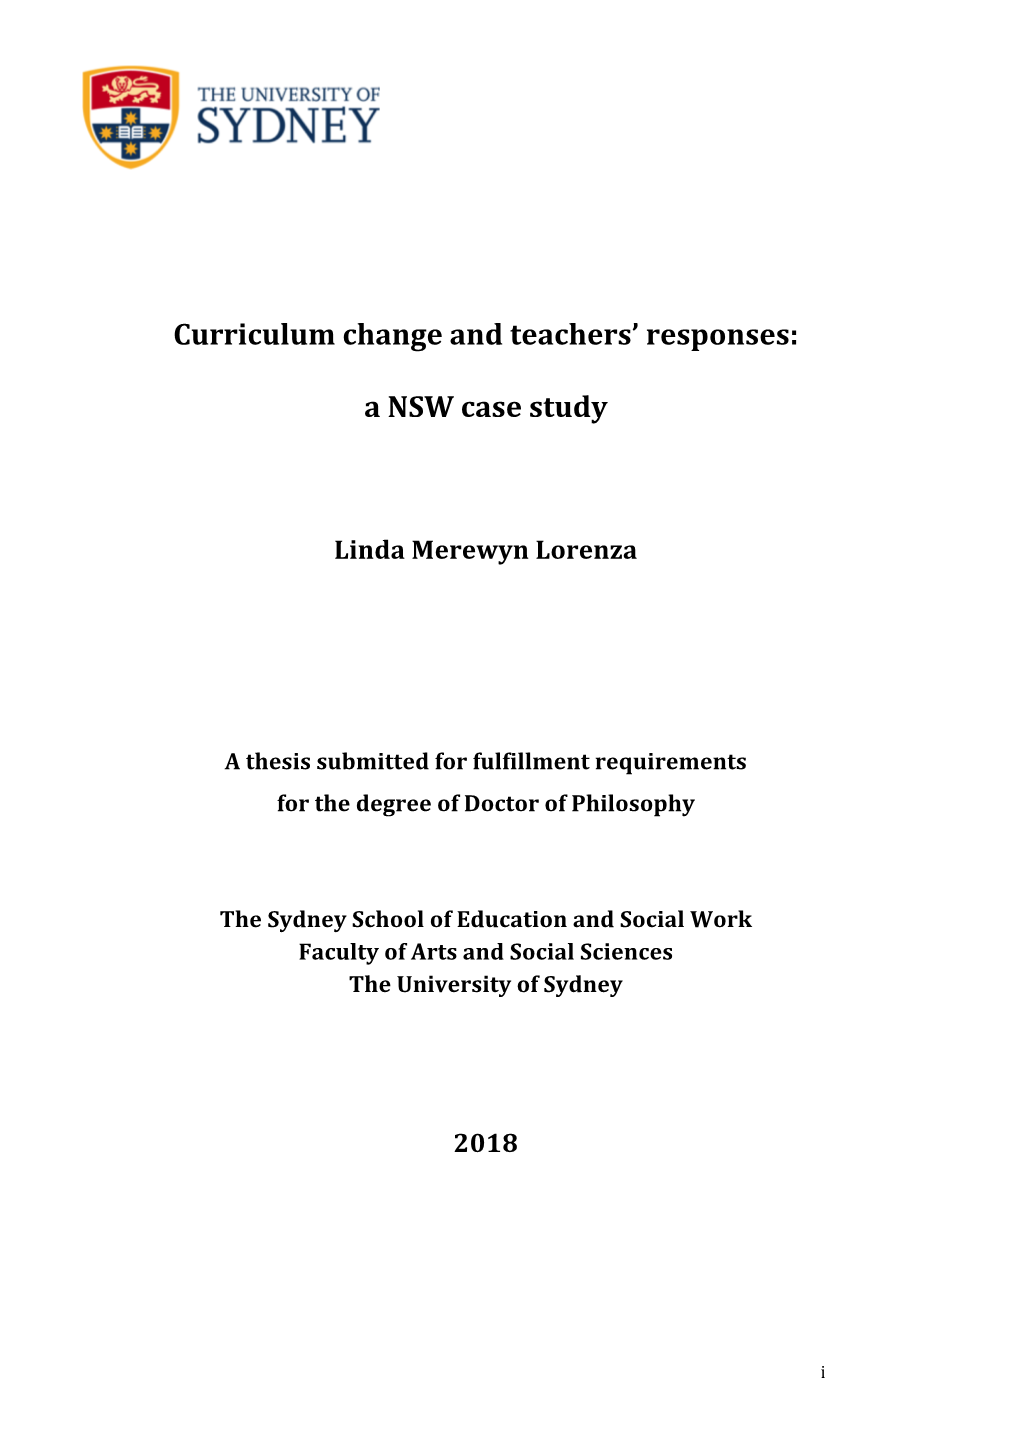 Curriculum Change and Teachers' Responses: a NSW Case Study